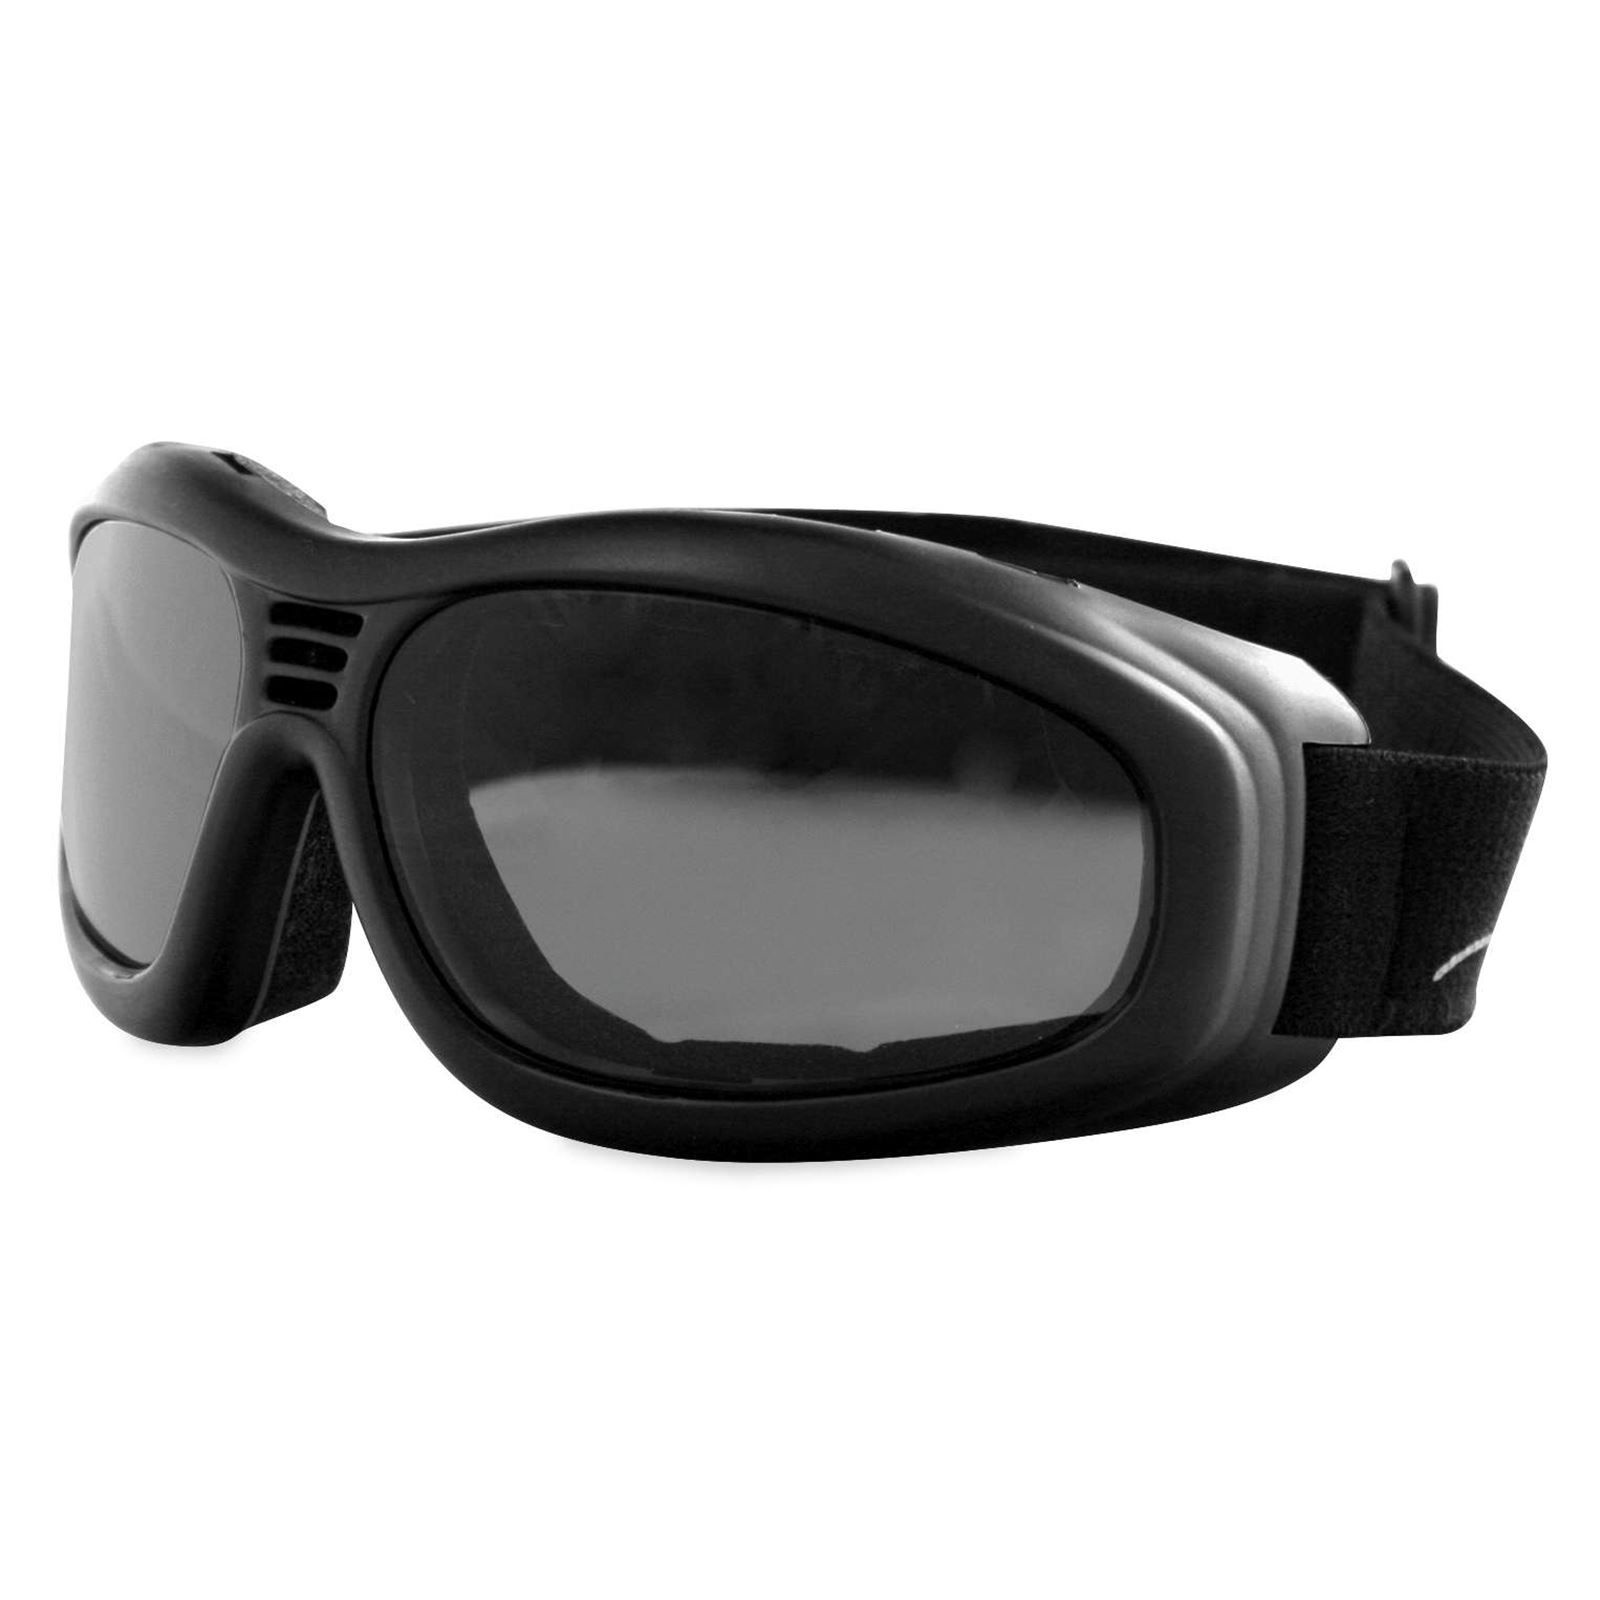 Bobster Touring II Goggles